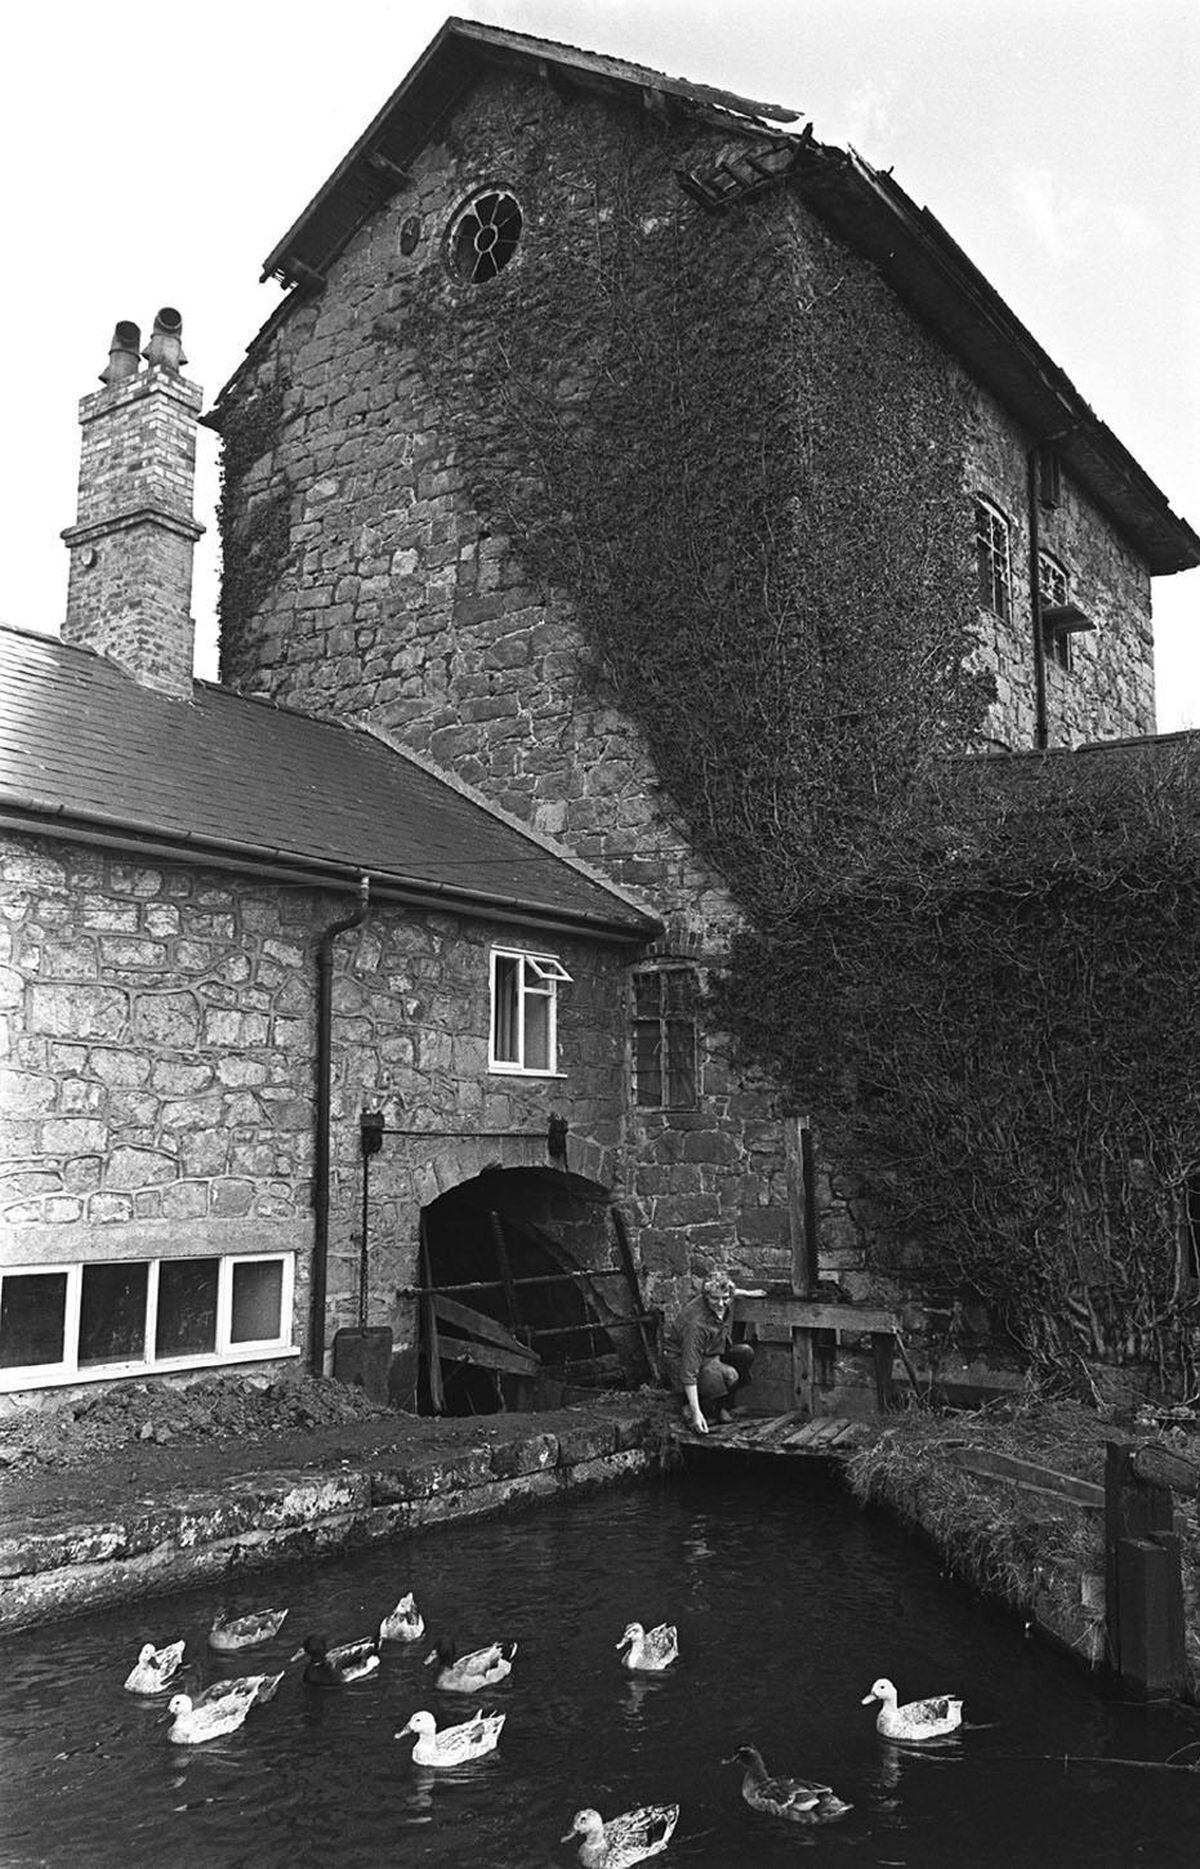 May 1969: A 500 year old mill that flourished during the Welsh wool trade was playing a new role mixing dough